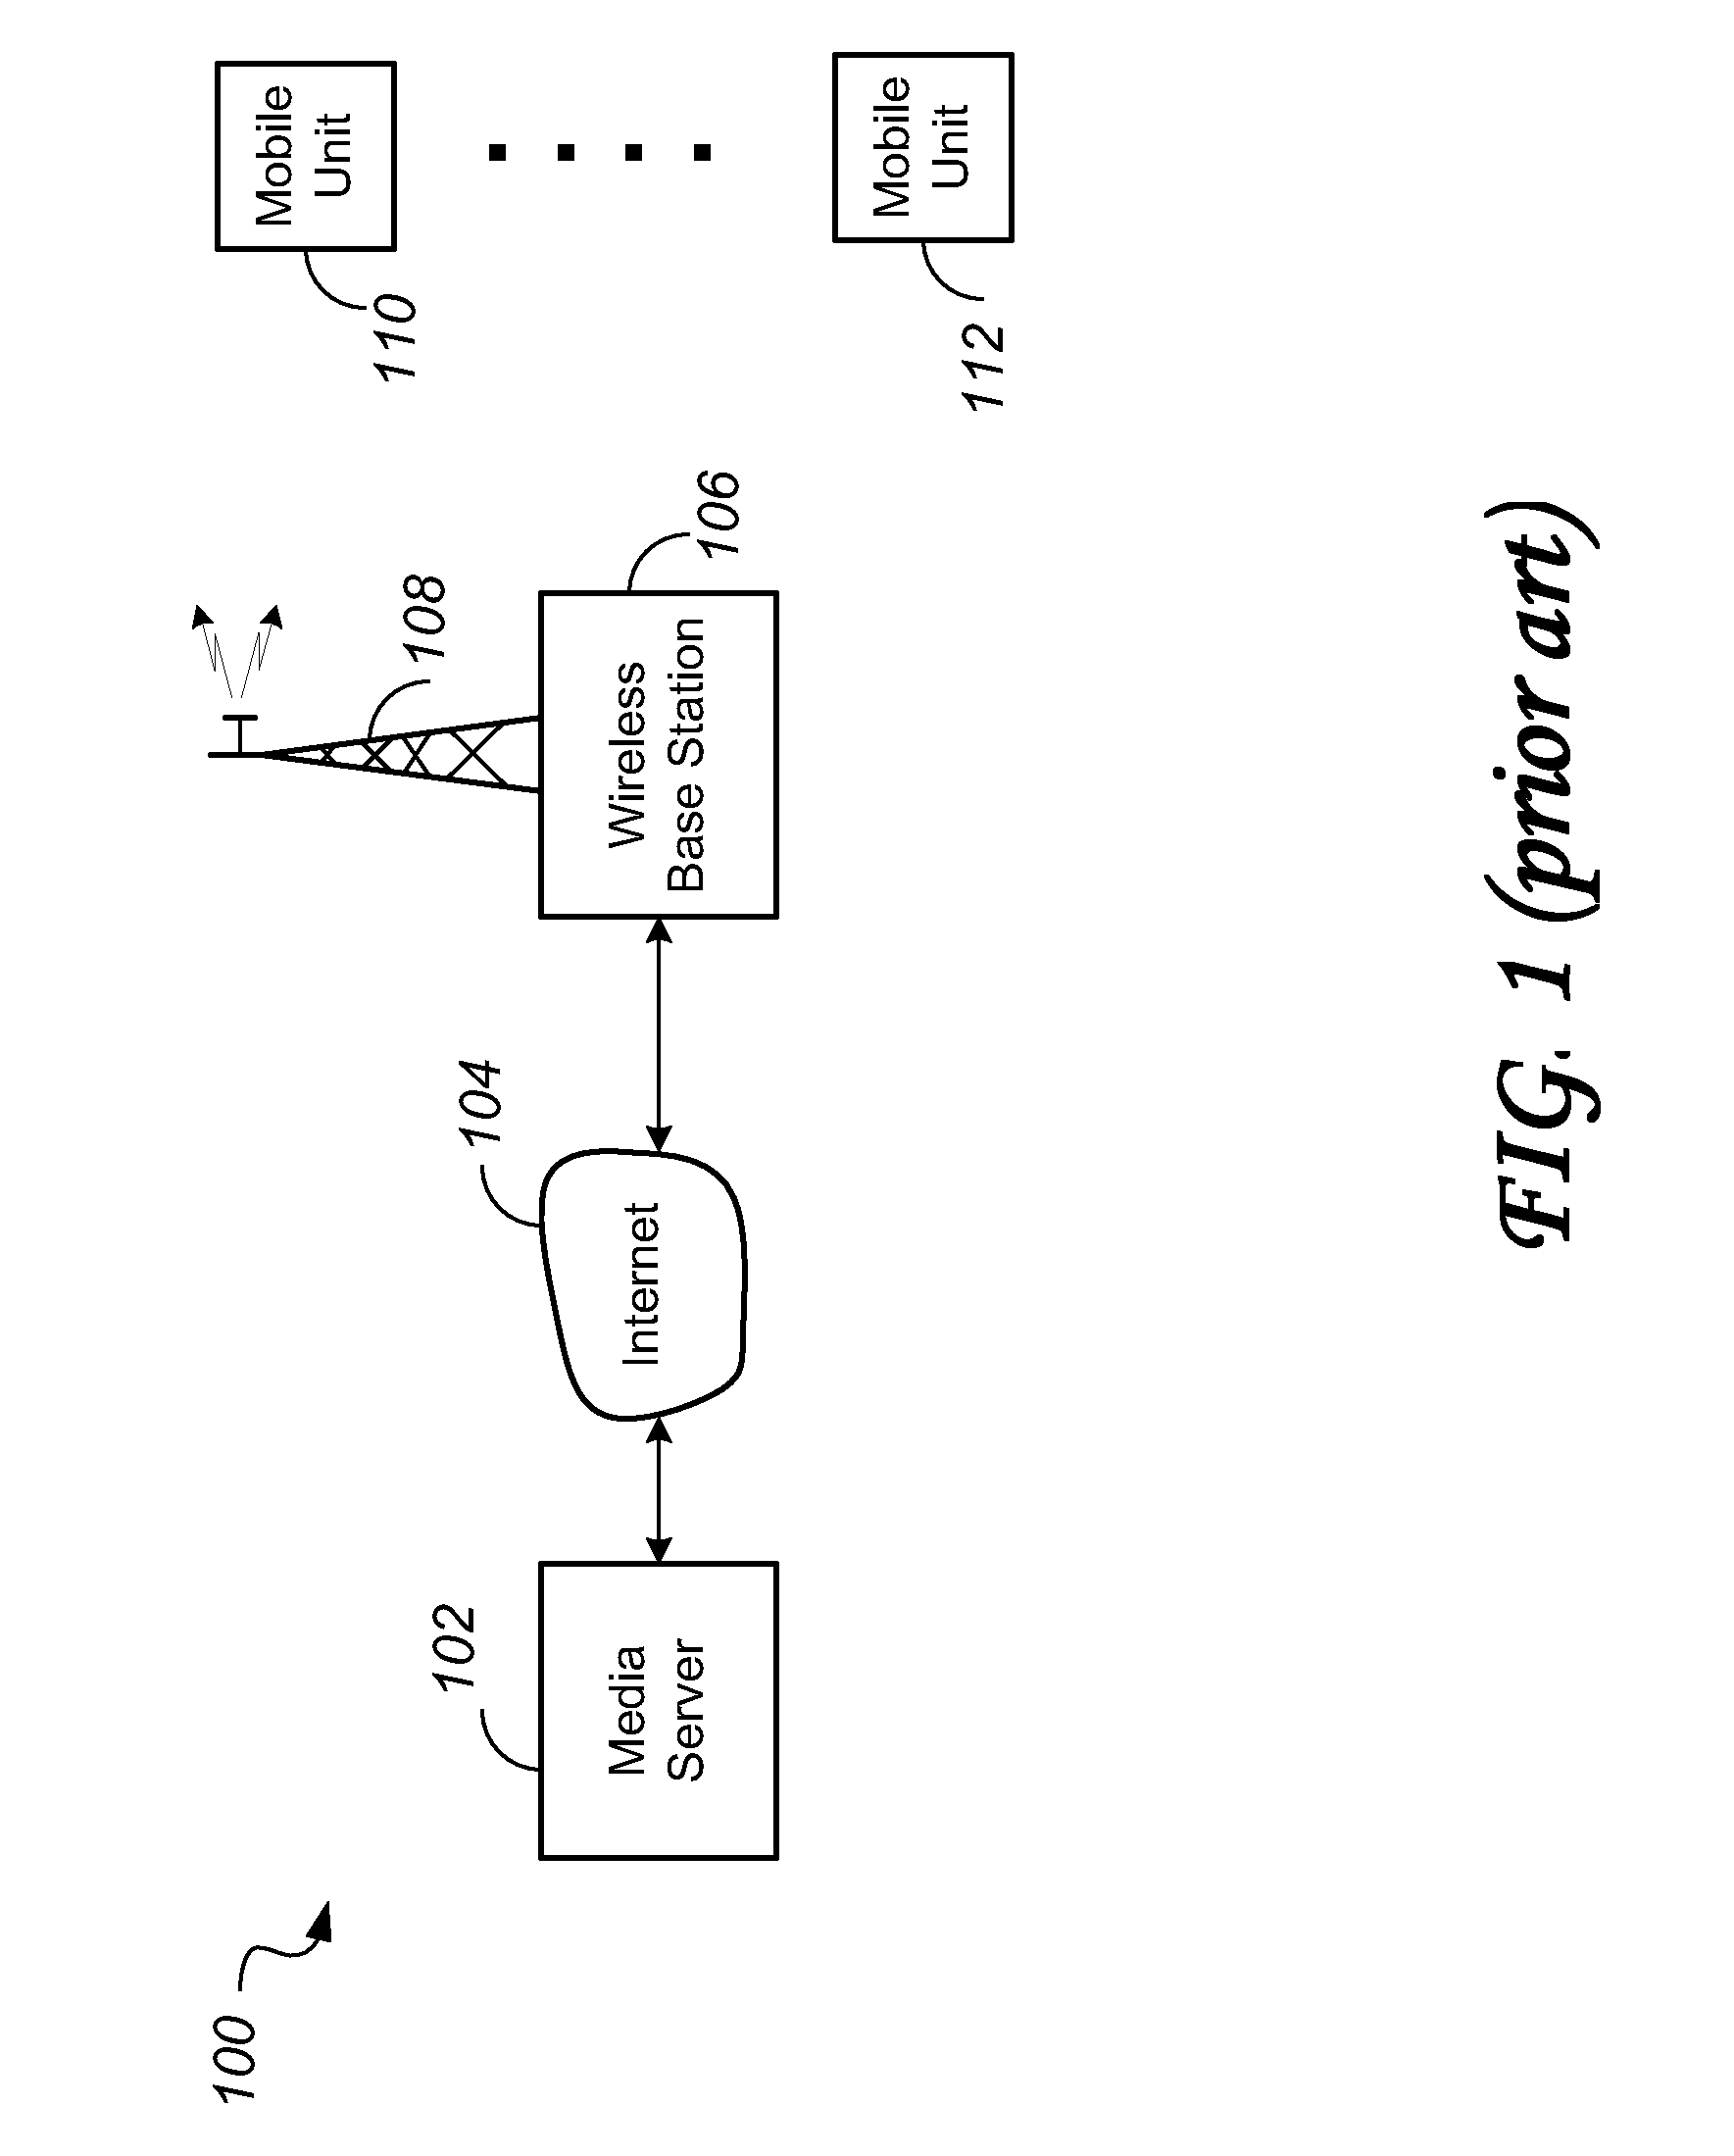 System and method of pacing real time media transmission over a broadband channel using micro bursting